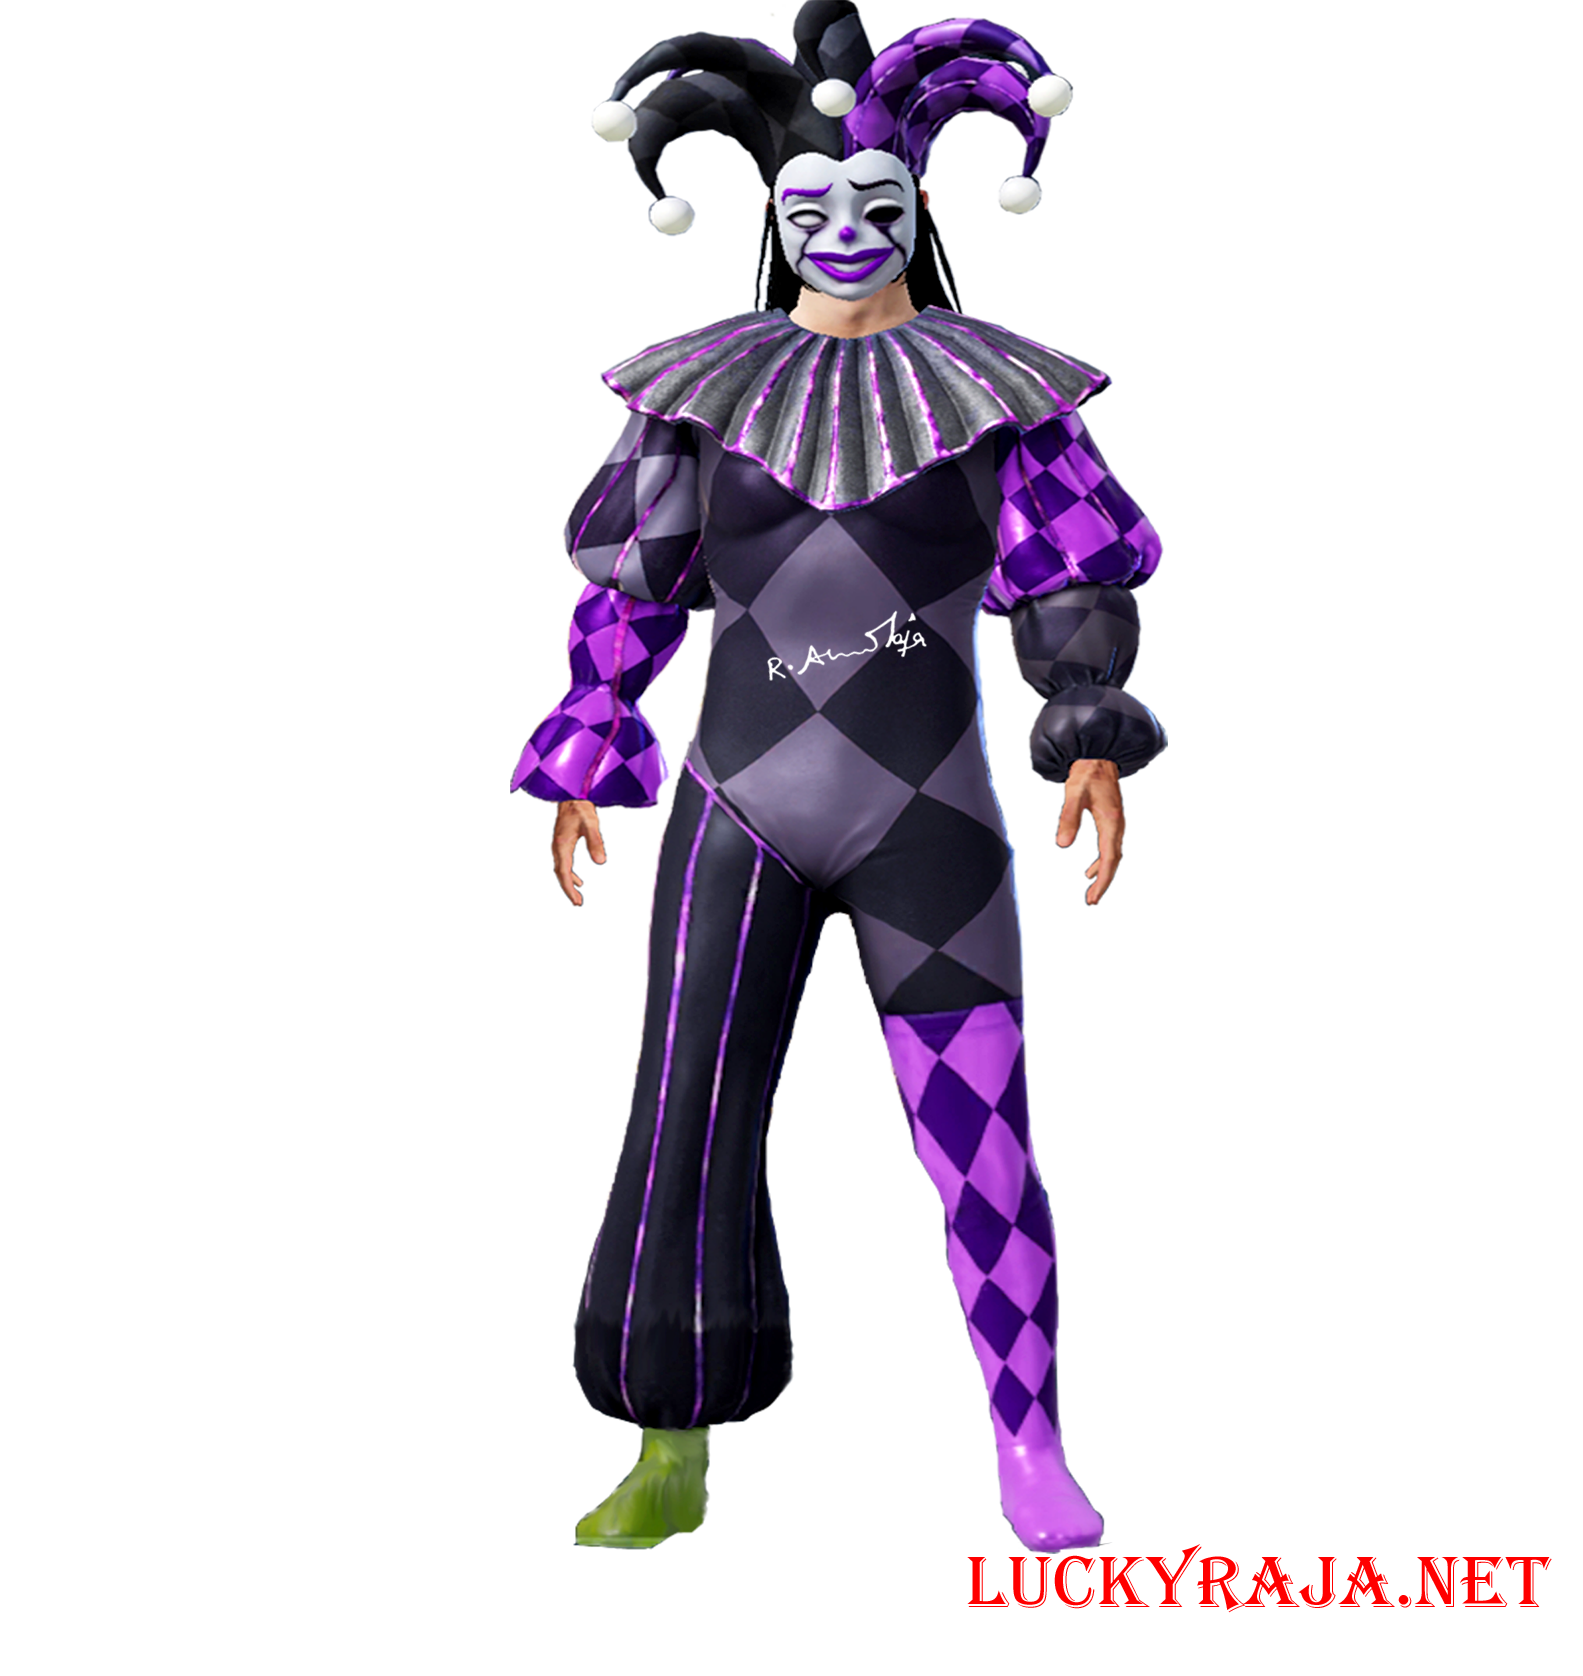 Merciless Jester ,Merciless Jester images,Merciless Jester pubg mobile,Merciless Jester outfit,pubg mobile outfits,animation,cartoon images